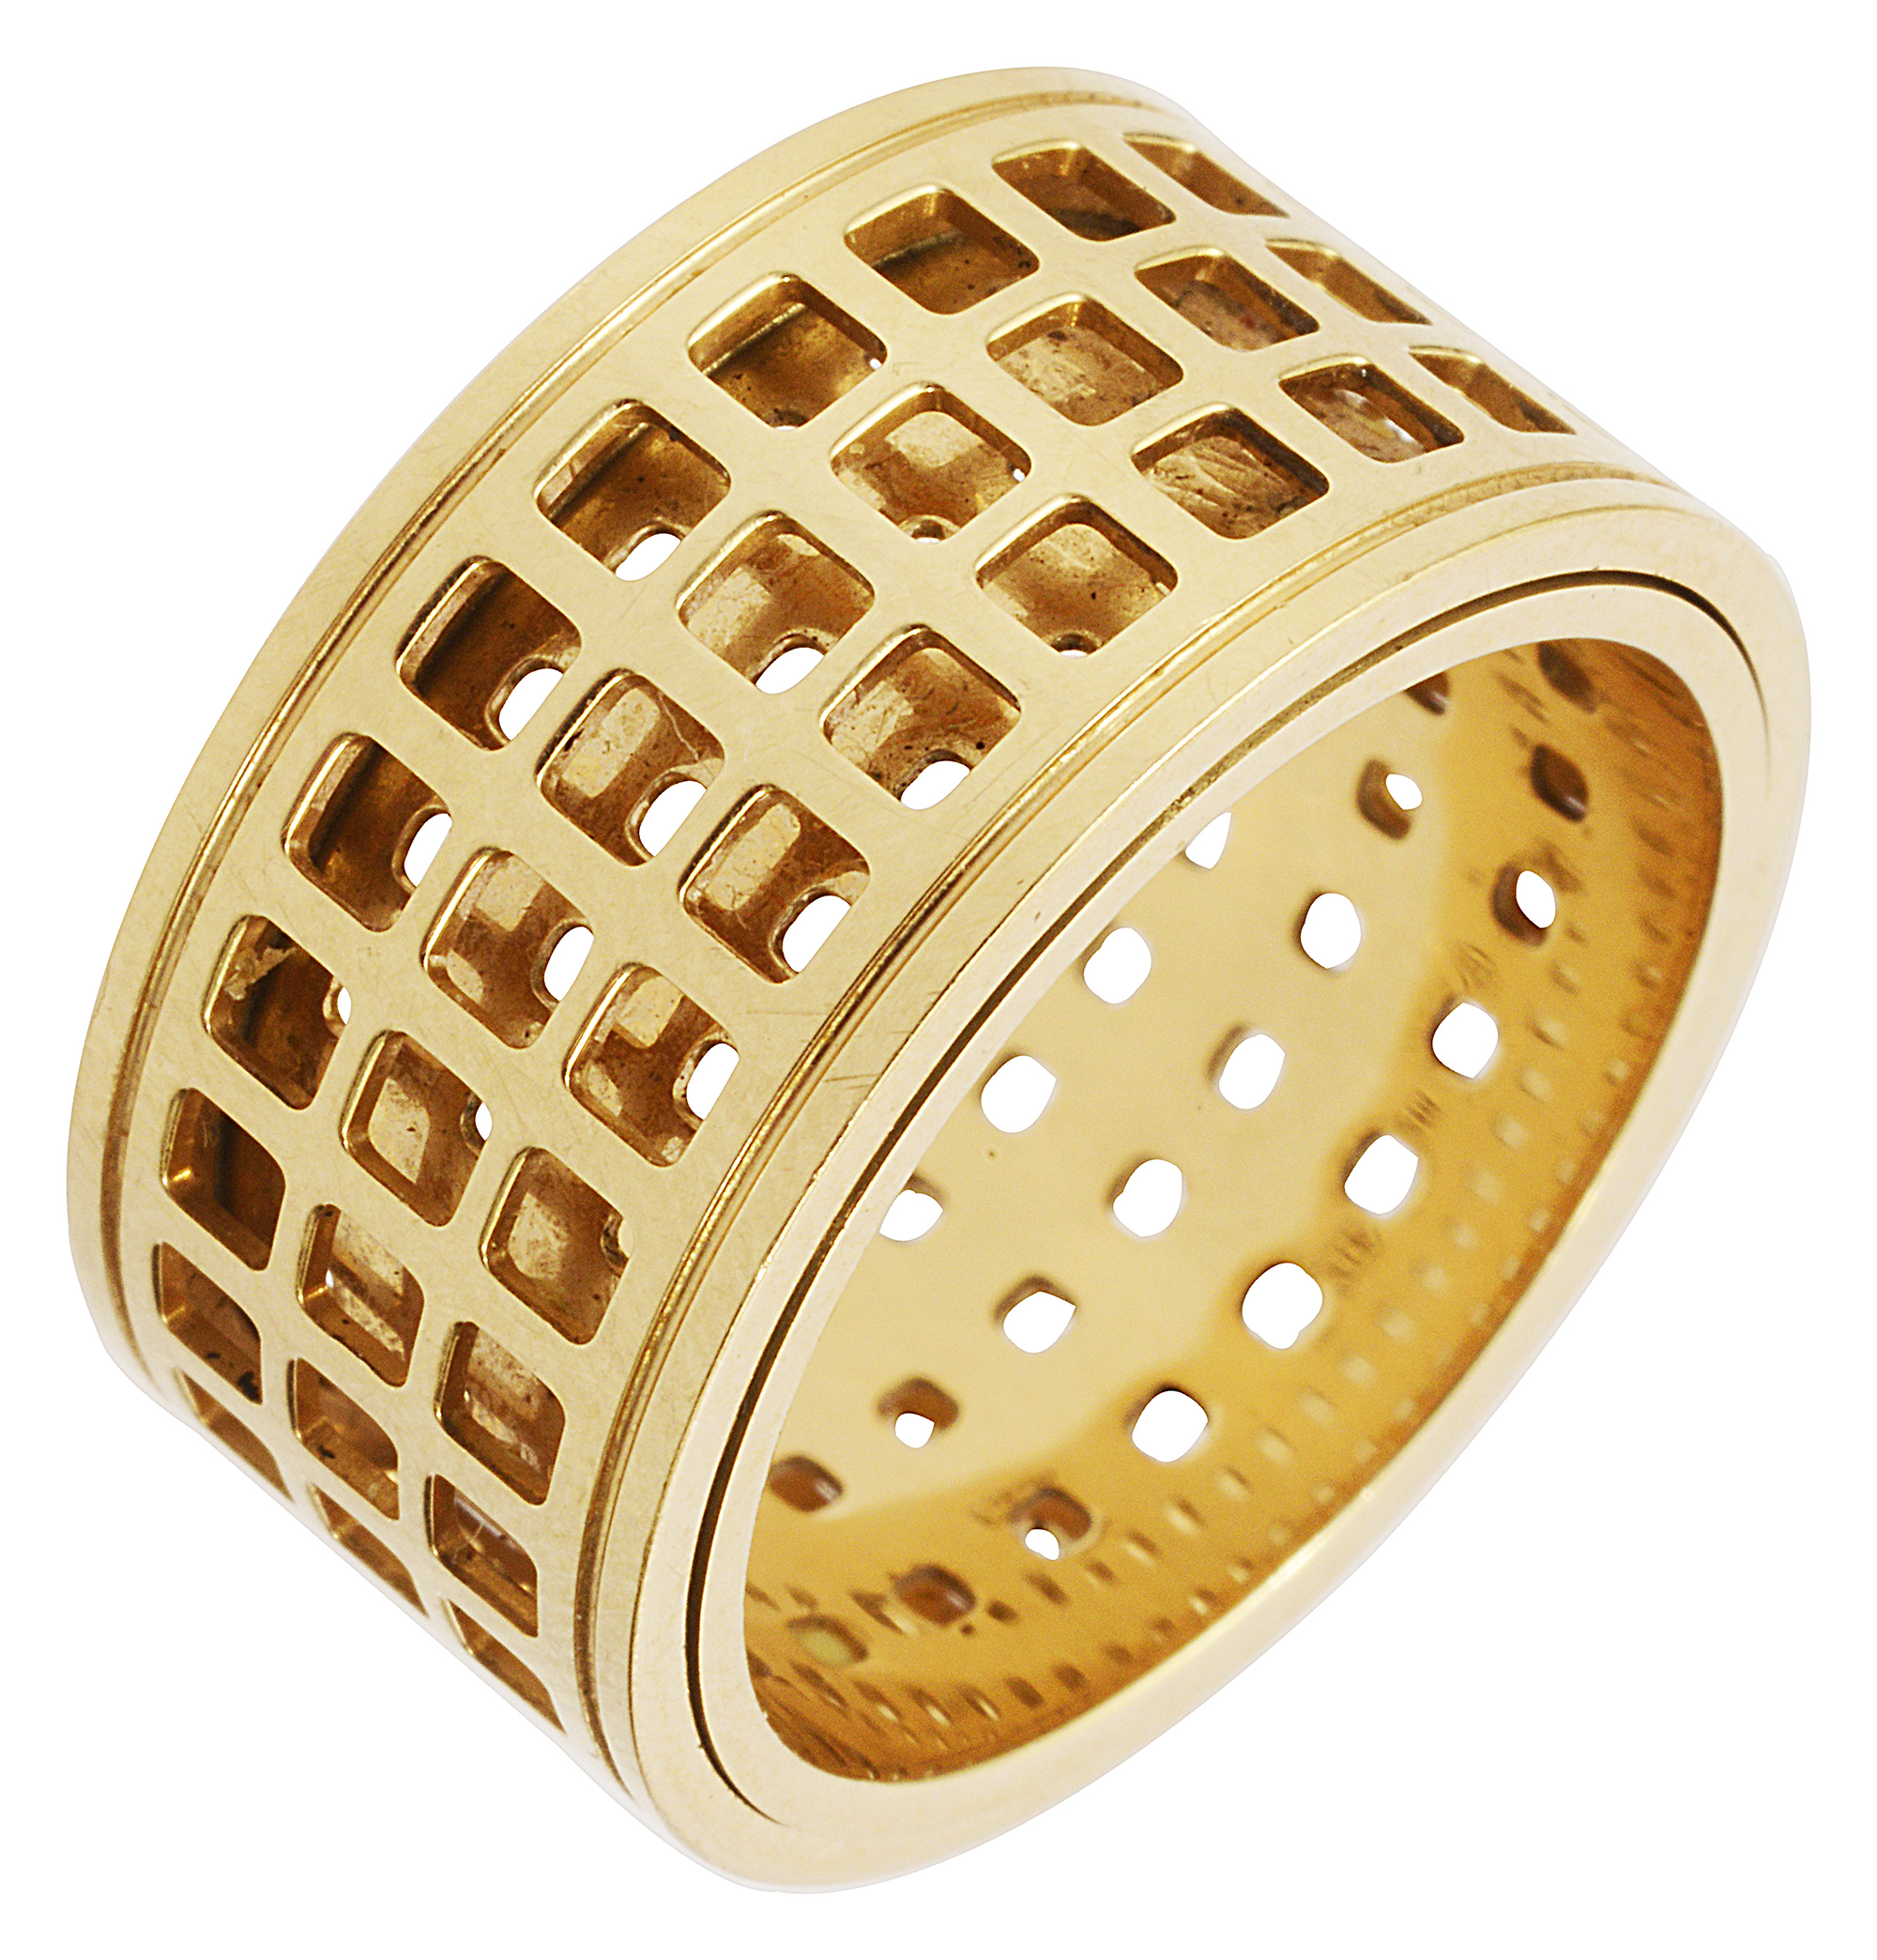 An 18ct yellow gold 'pantheon' ring by Gucci